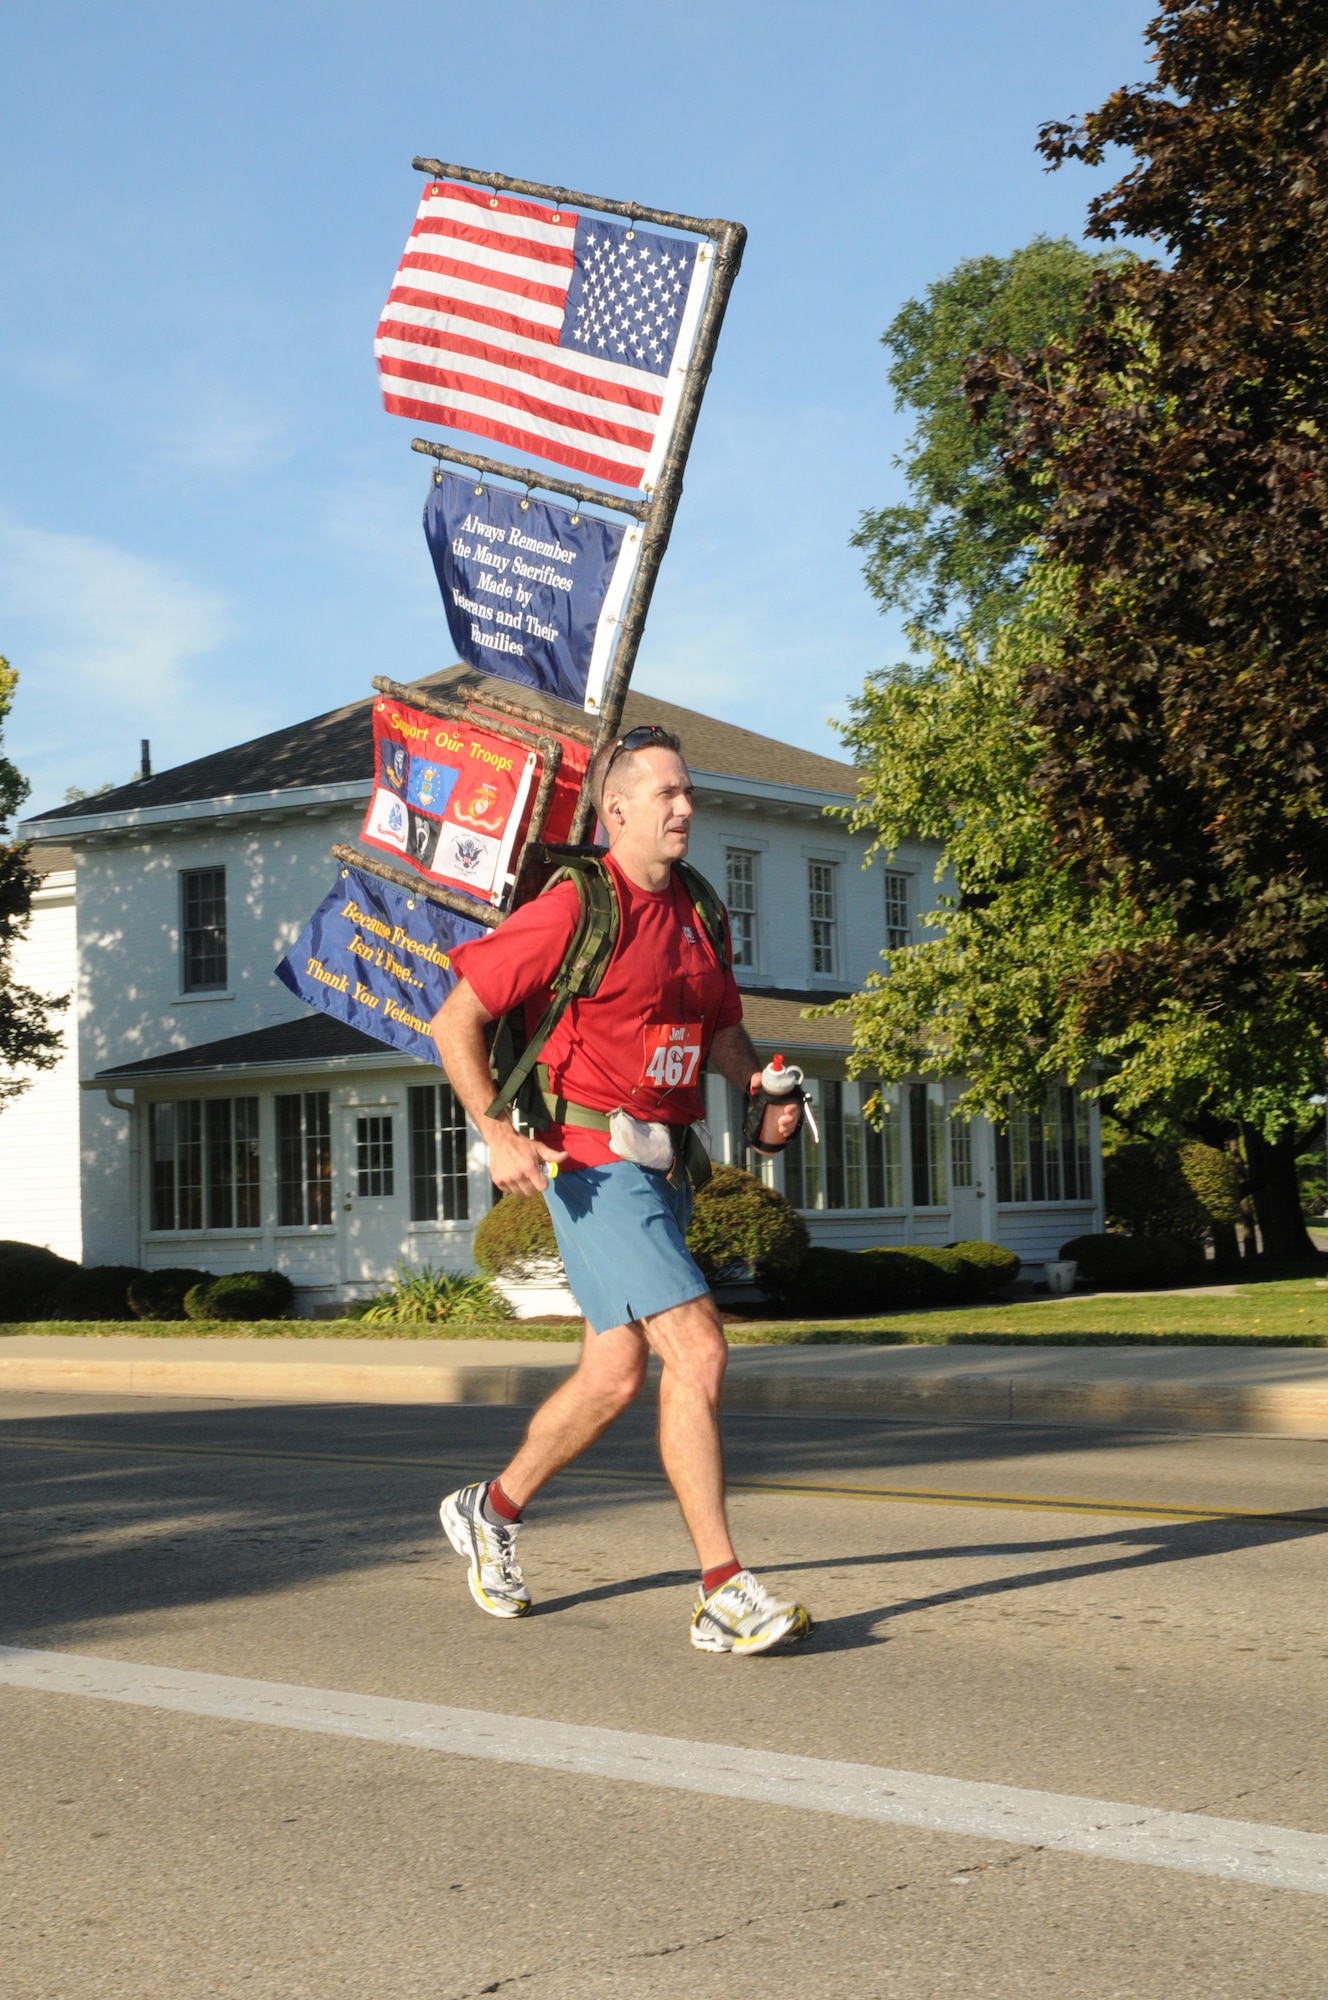 Jeff Burke shows his appreciation for veterans while running the U.S. Air Force Marathon Sept. 19, 2009 at Wright-Patterson Air Force Base, Ohio.  Burke, 48, is from Stow, Ohio.  (Air Force photo/Al Bright)